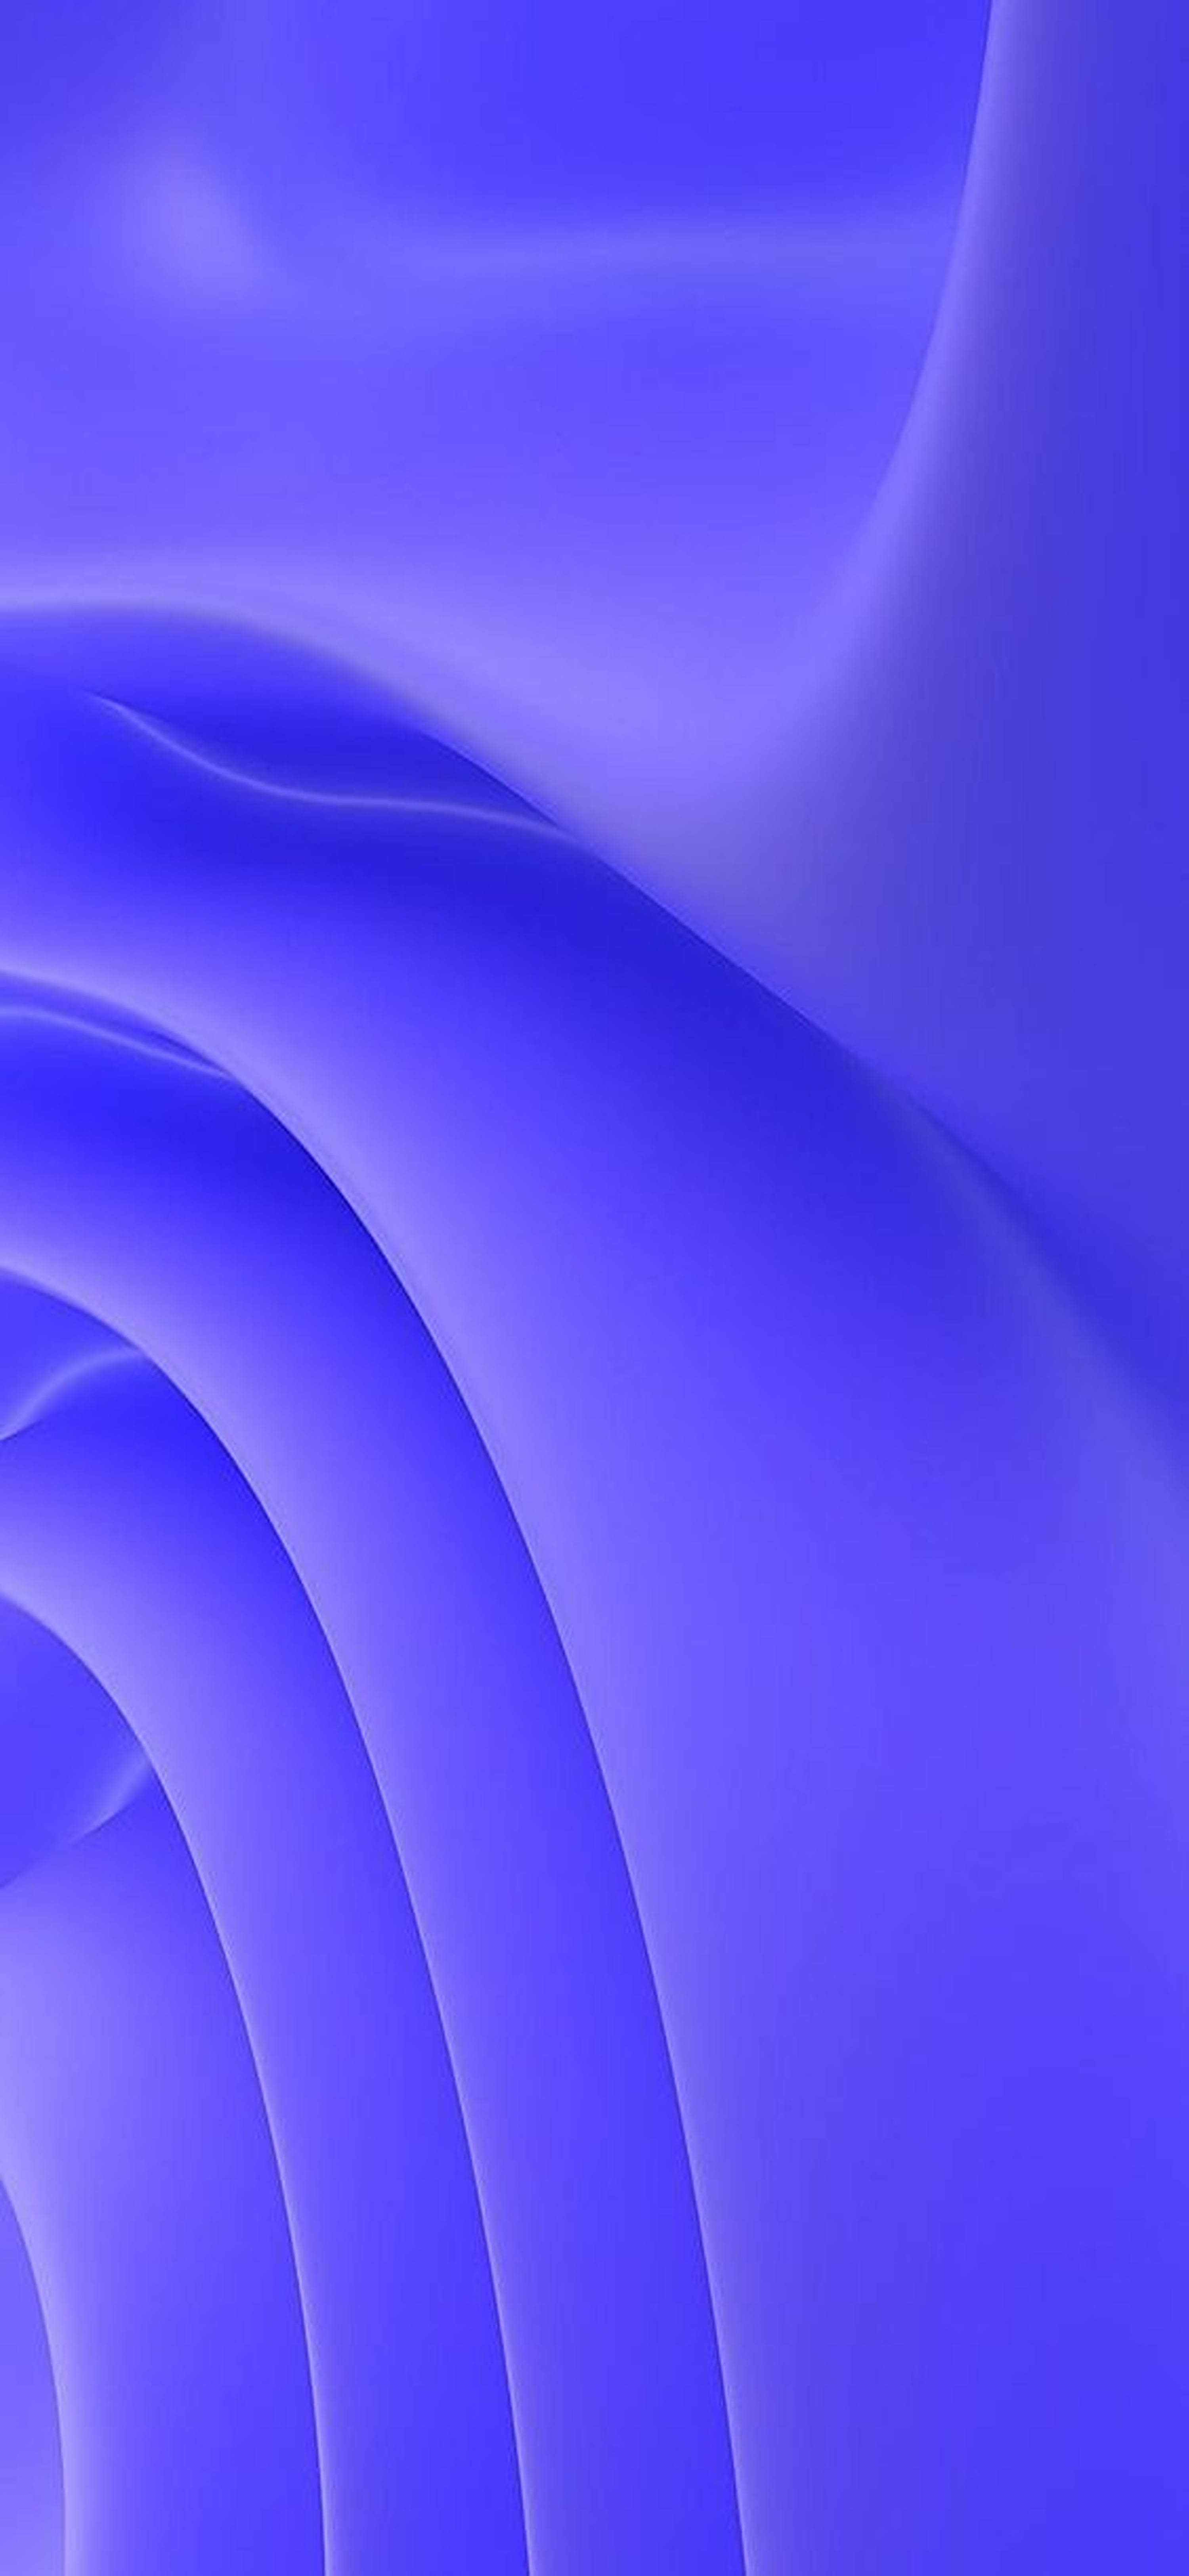 Abstract 3d Folds Redmi Note 9 Pro Background